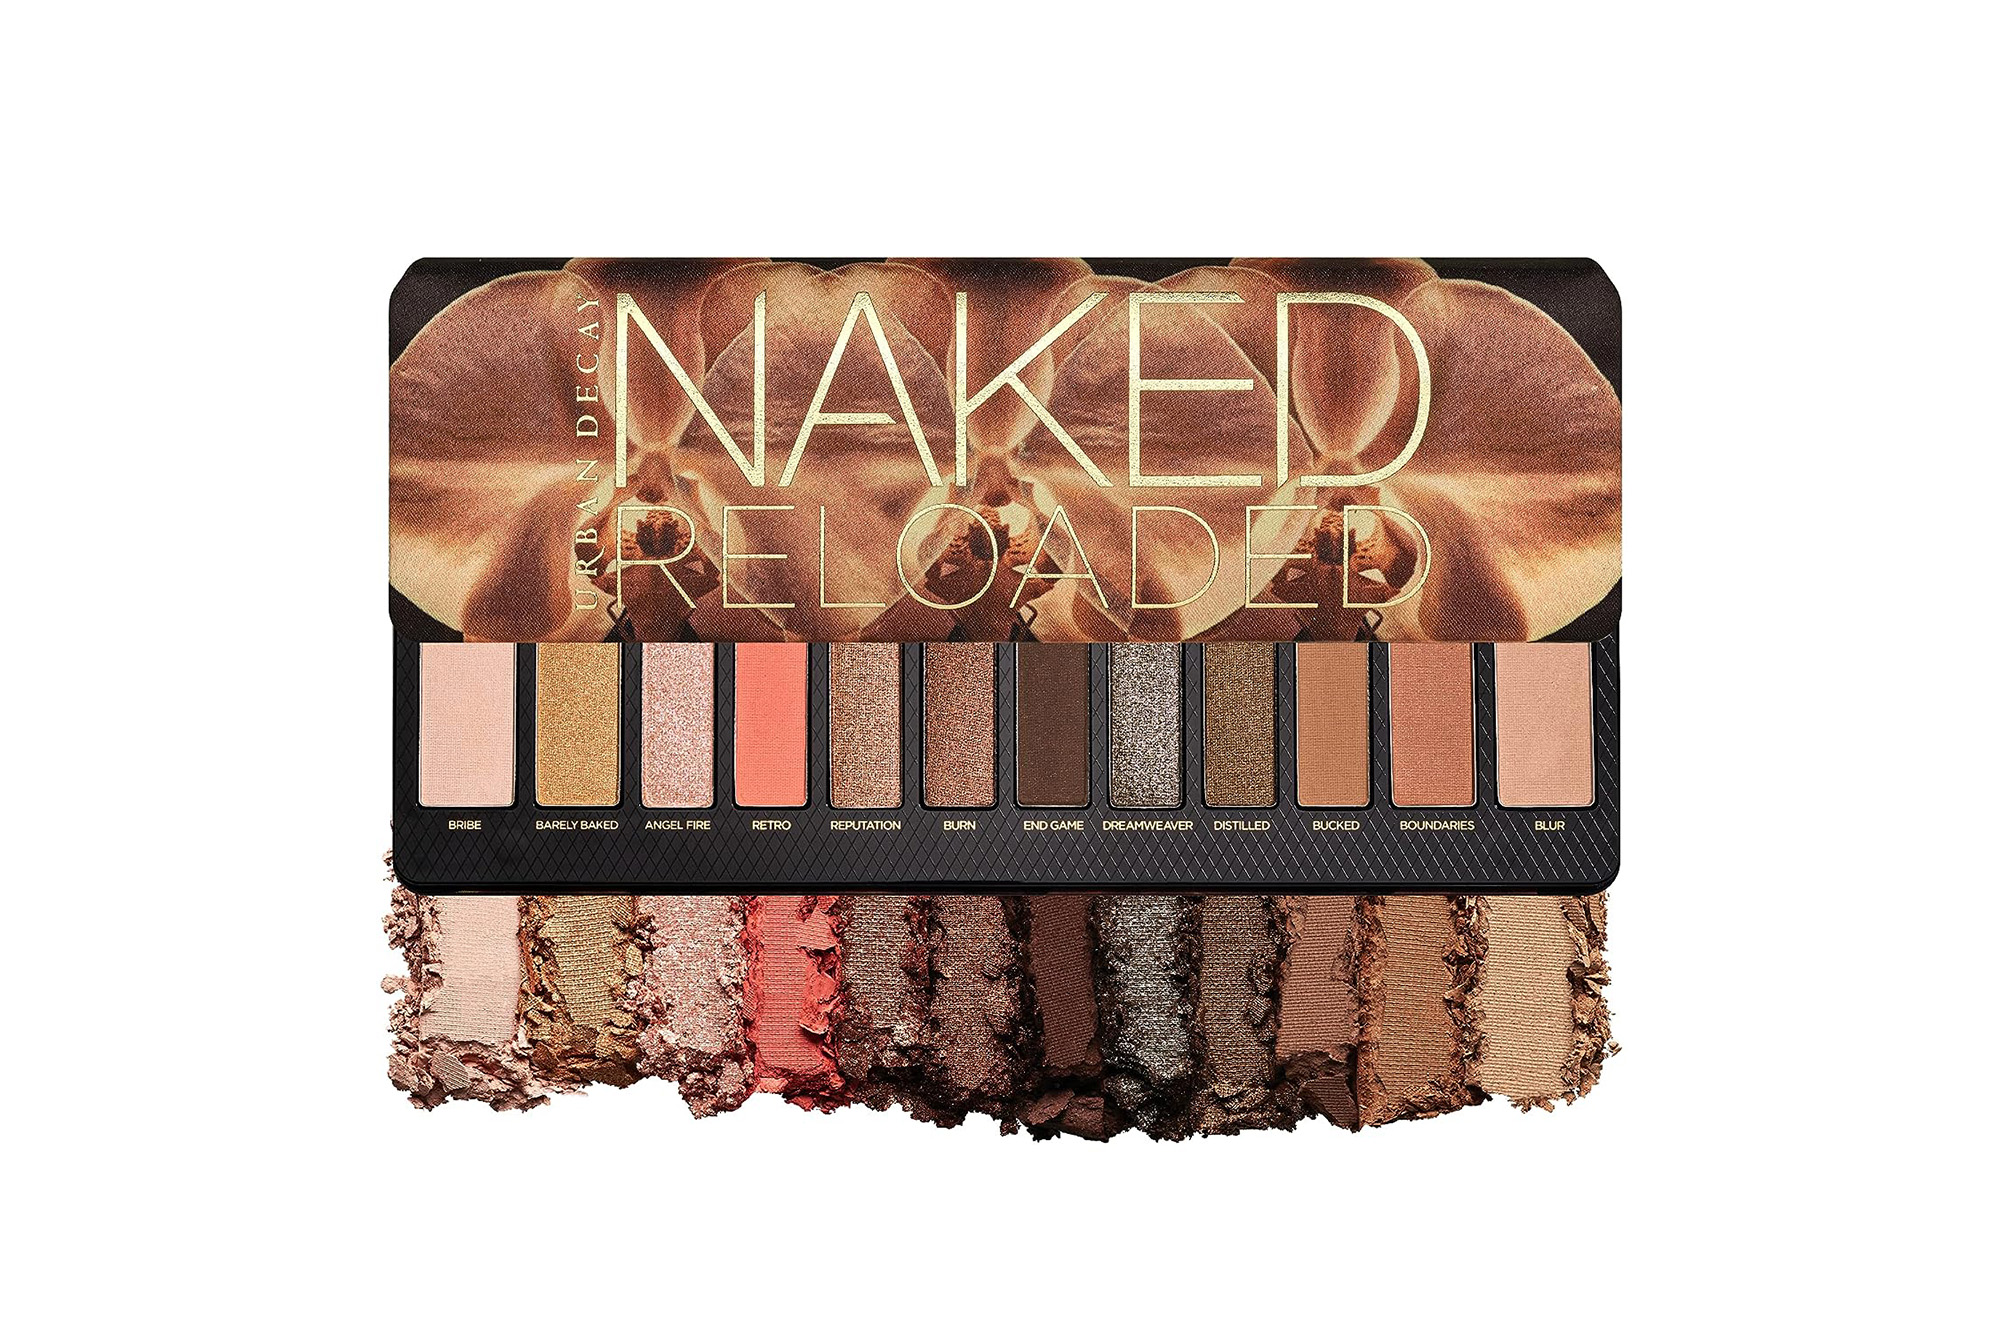 An Urban Decay Naked palatte